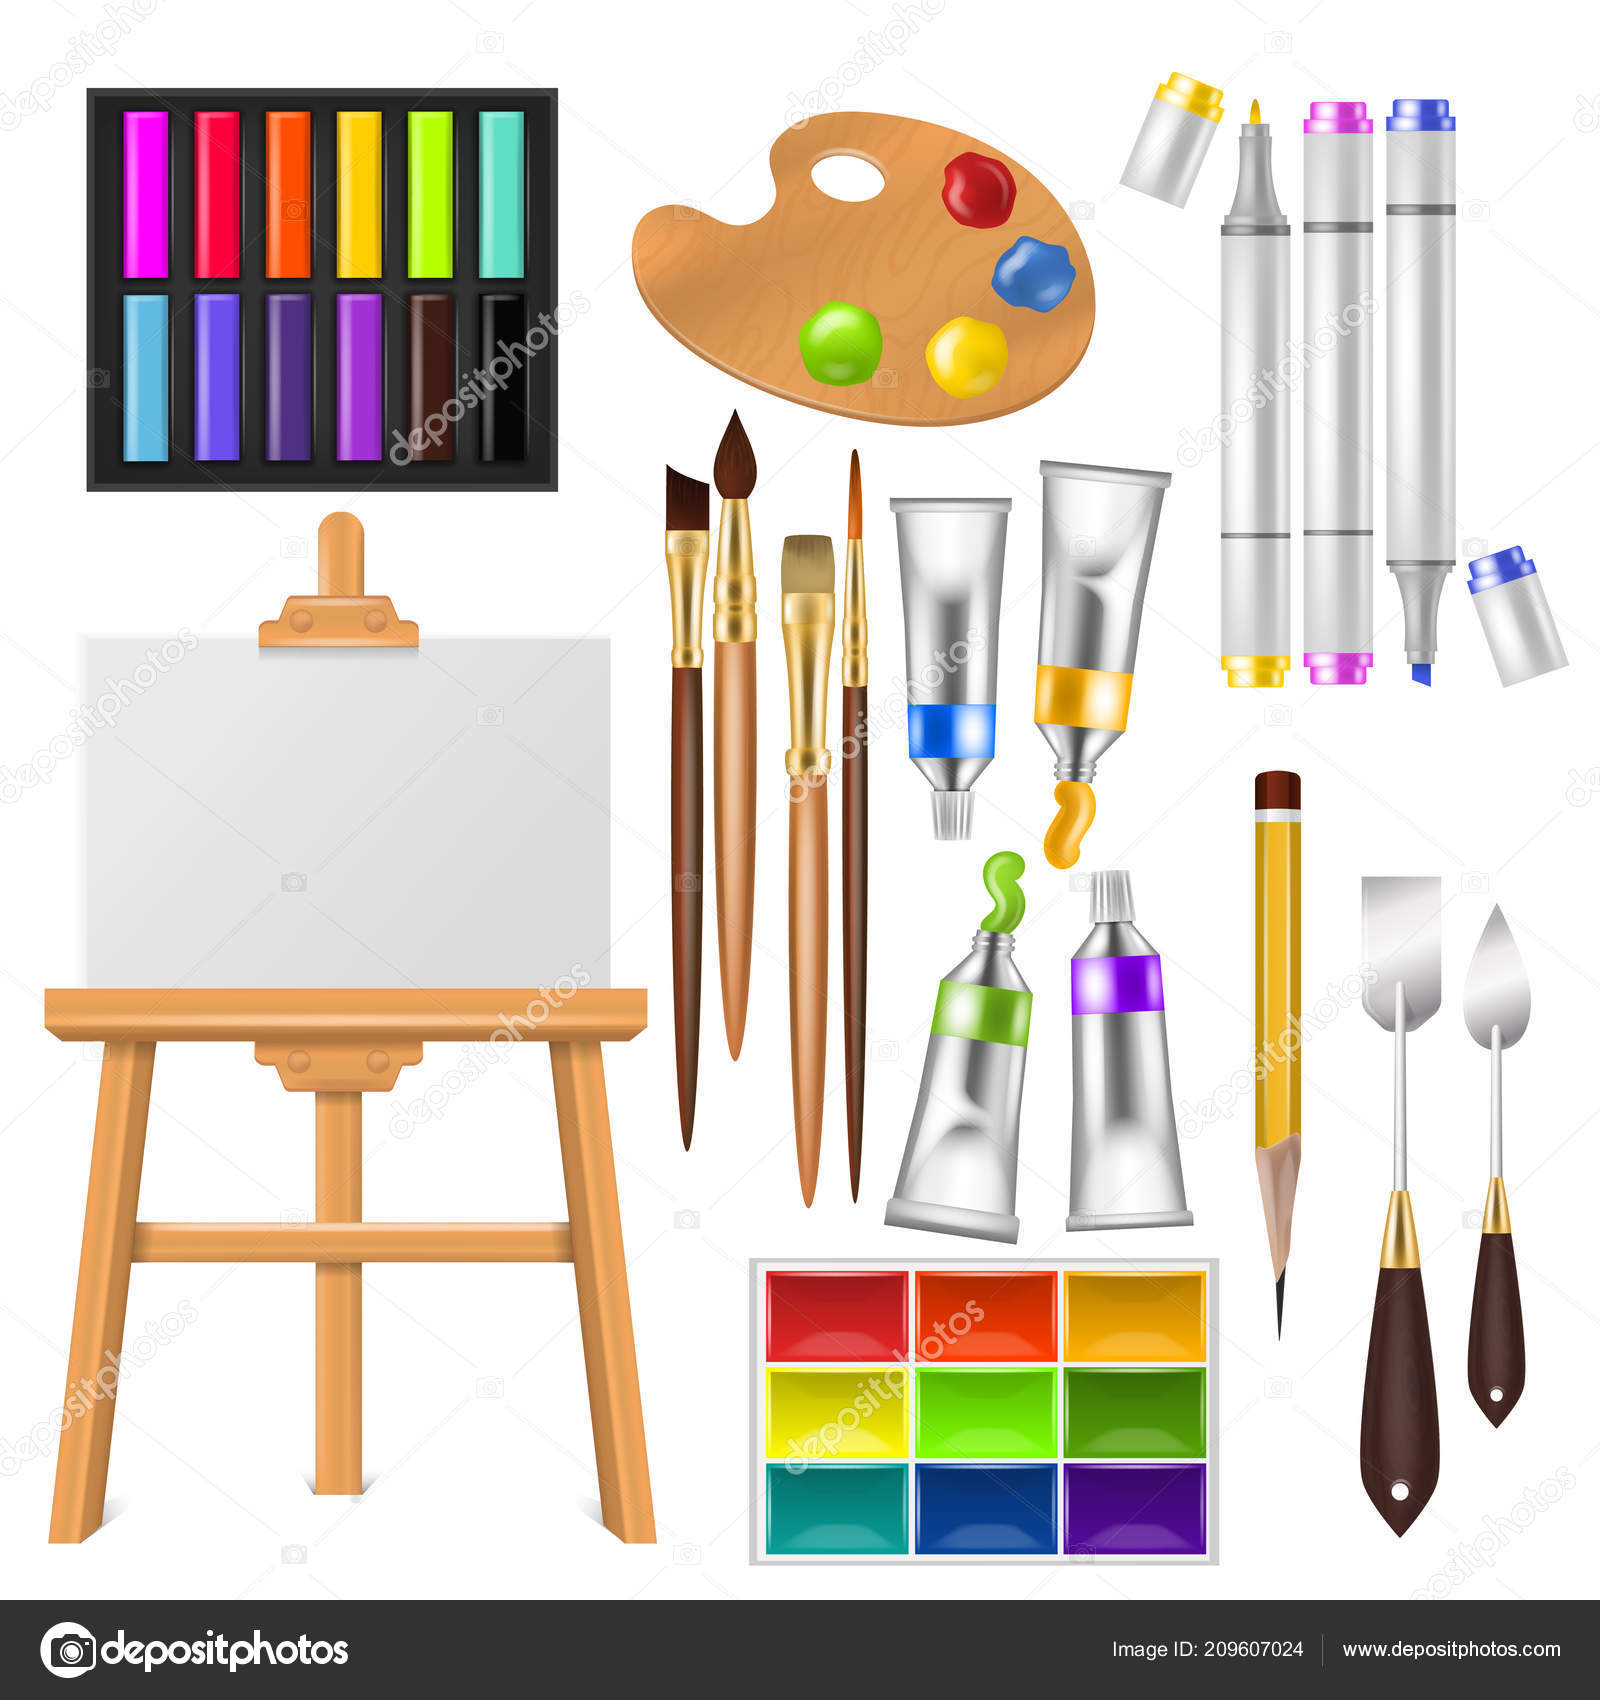 Artist palette with art tools and supplies Vector Image